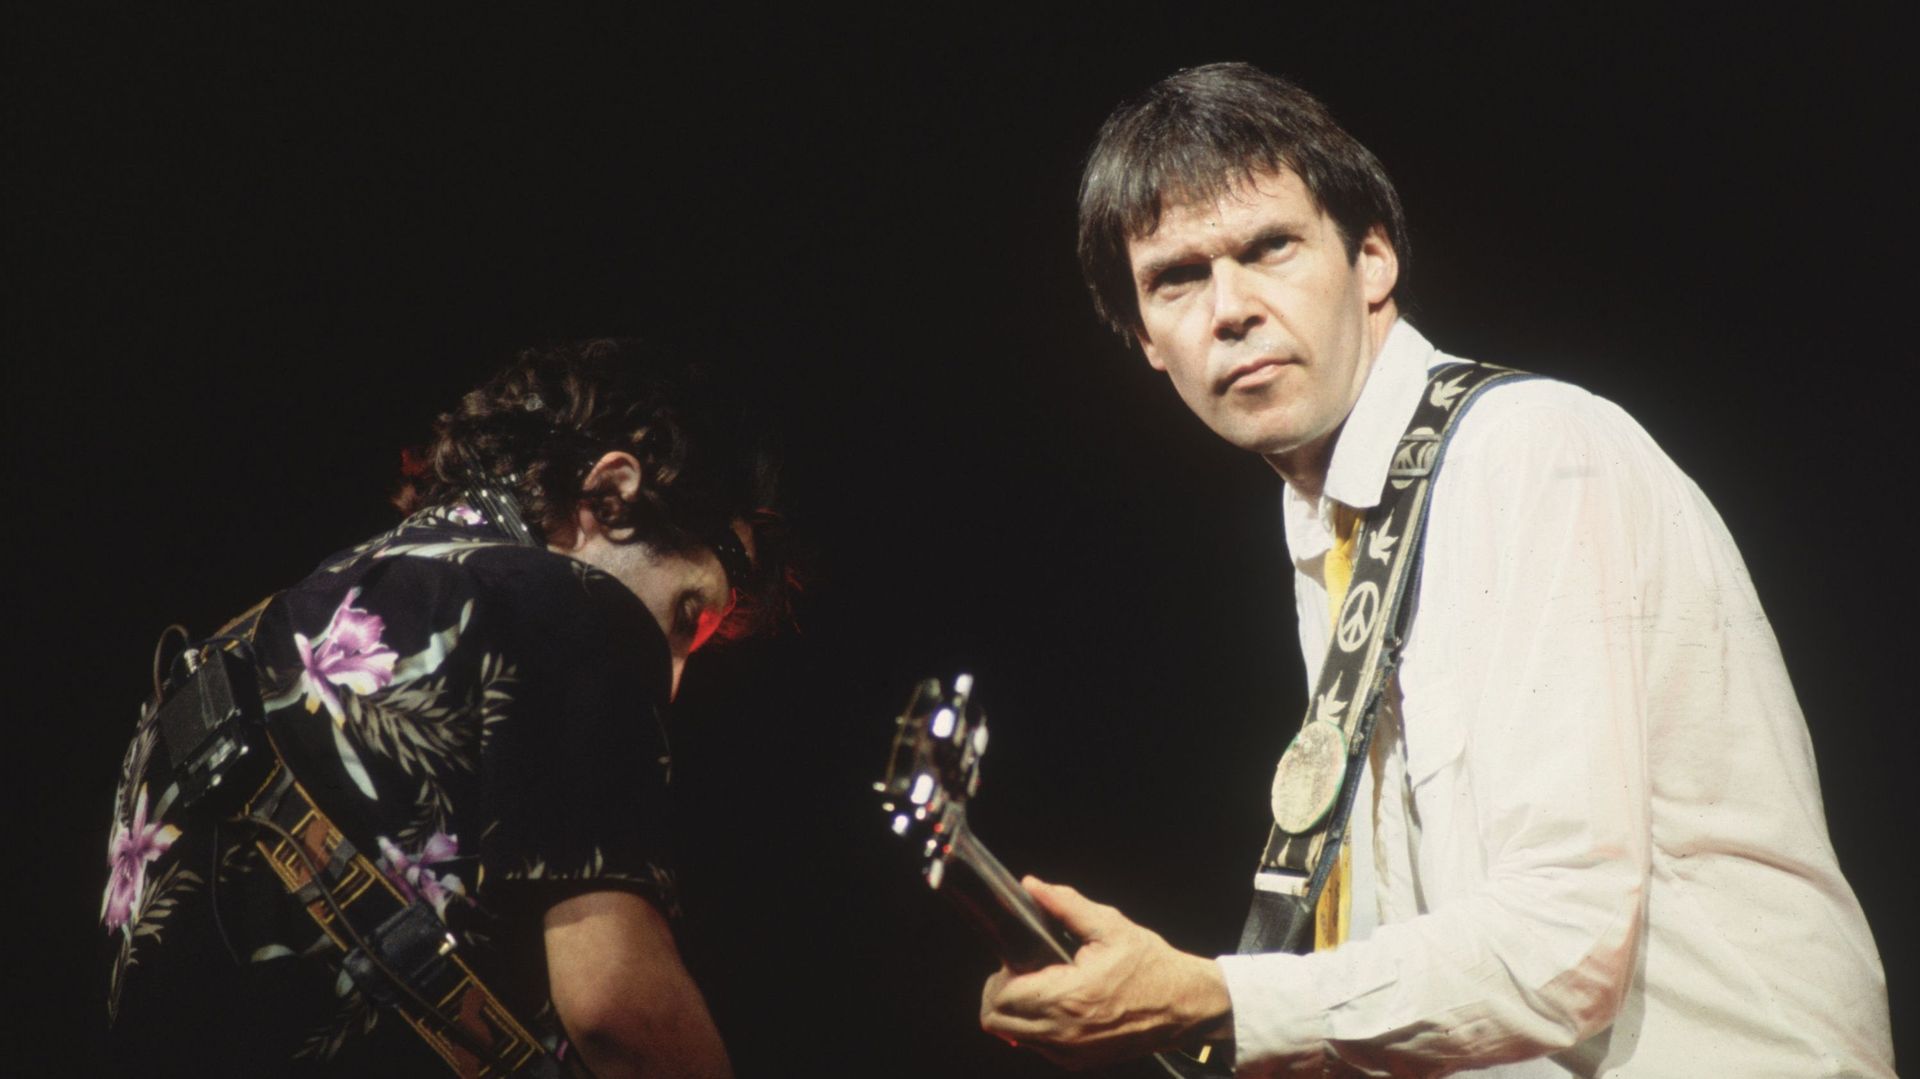 28th September 1982: Canadian singer, songwriter and guitarist, Neil Young playing at Wembley Arena, London, with fellow guitarist Nils Lofgren (left). (Photo by Hulton Archive/Getty Images)